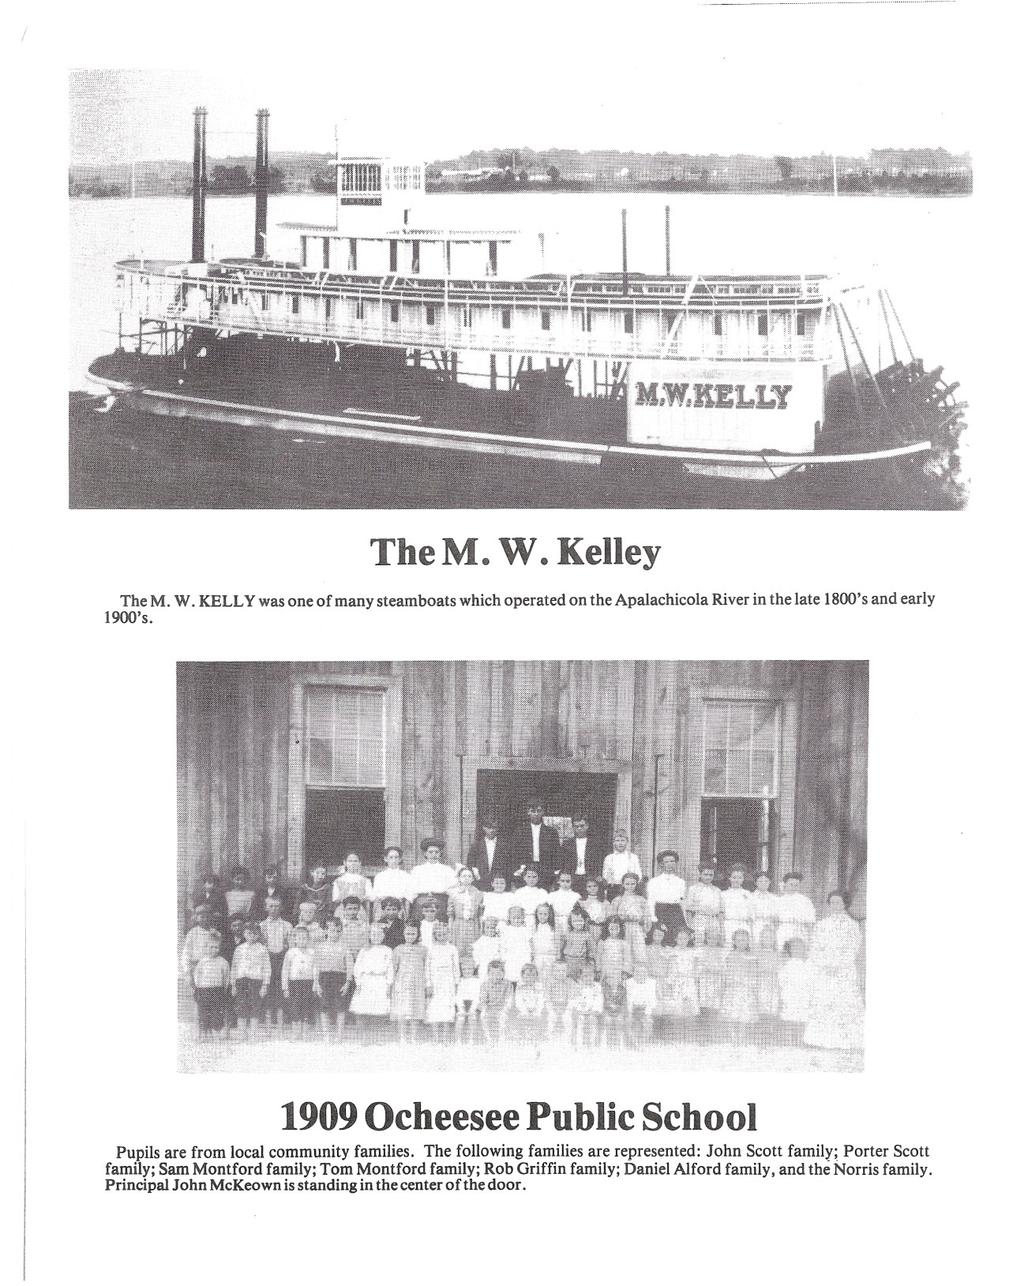 f f TheM. Wo Kelley The M. W. KELLY was one of many steamboats which operated on the Apalachicola River in the late 1800's and early 1900's.